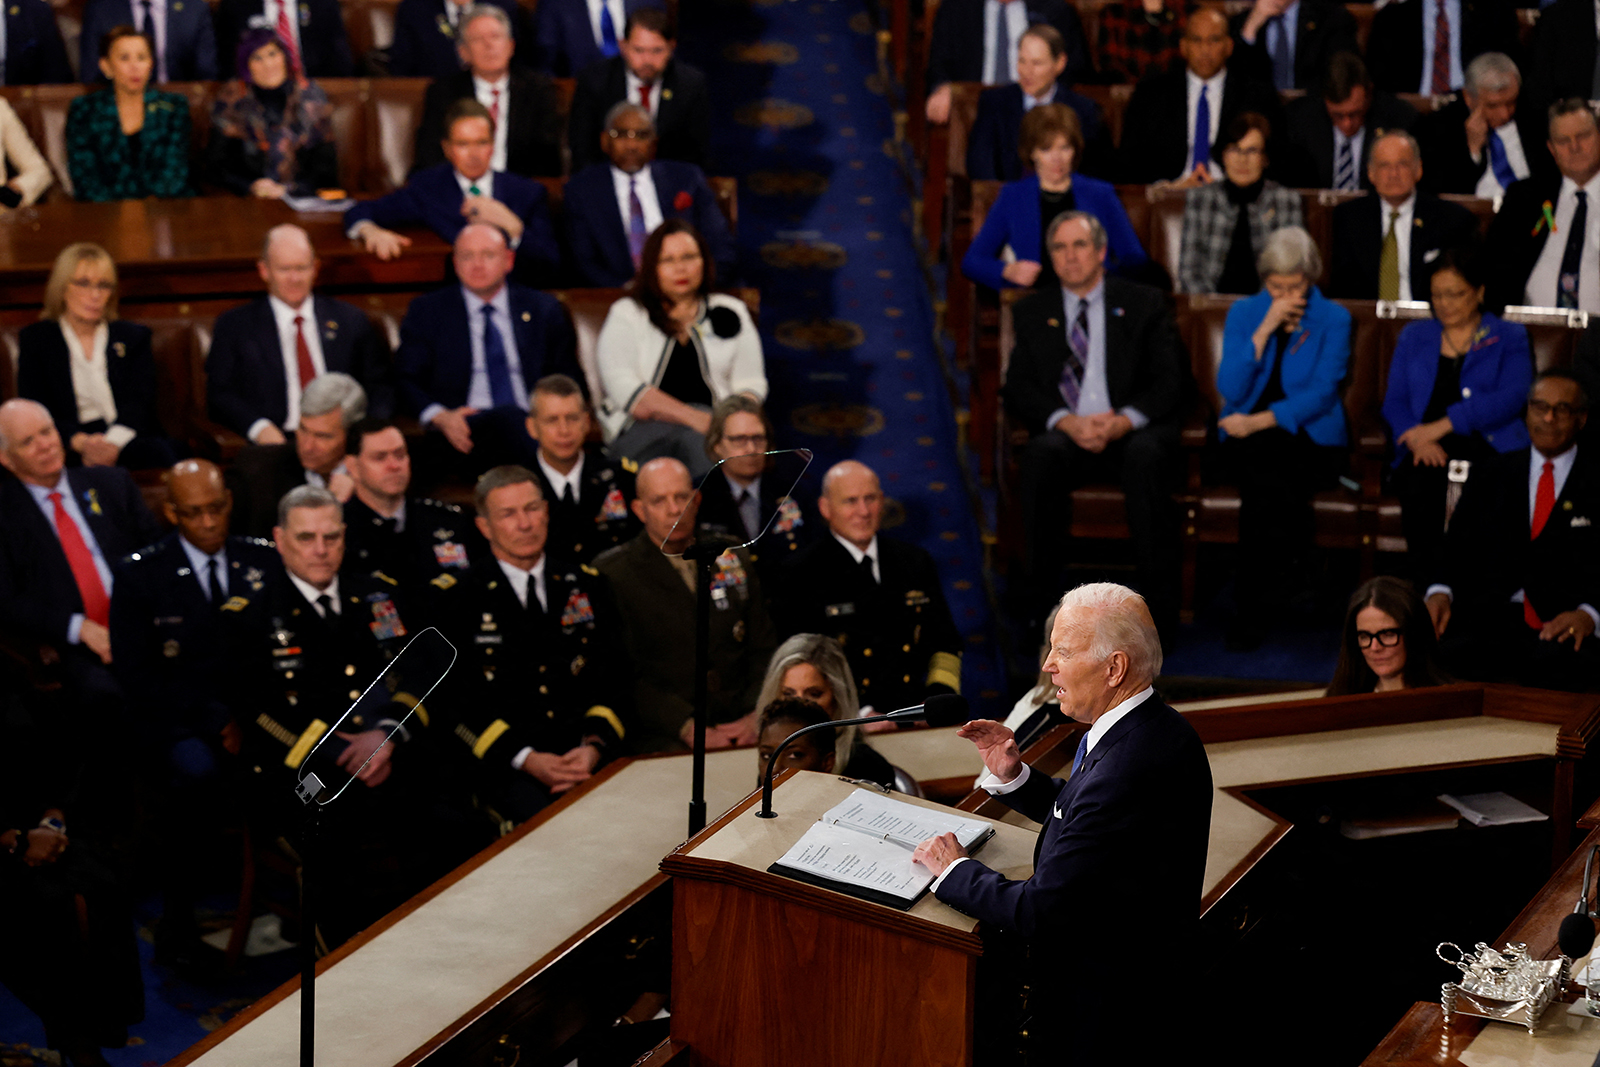 U.S. President Joe Biden delivers his State of the Union address.